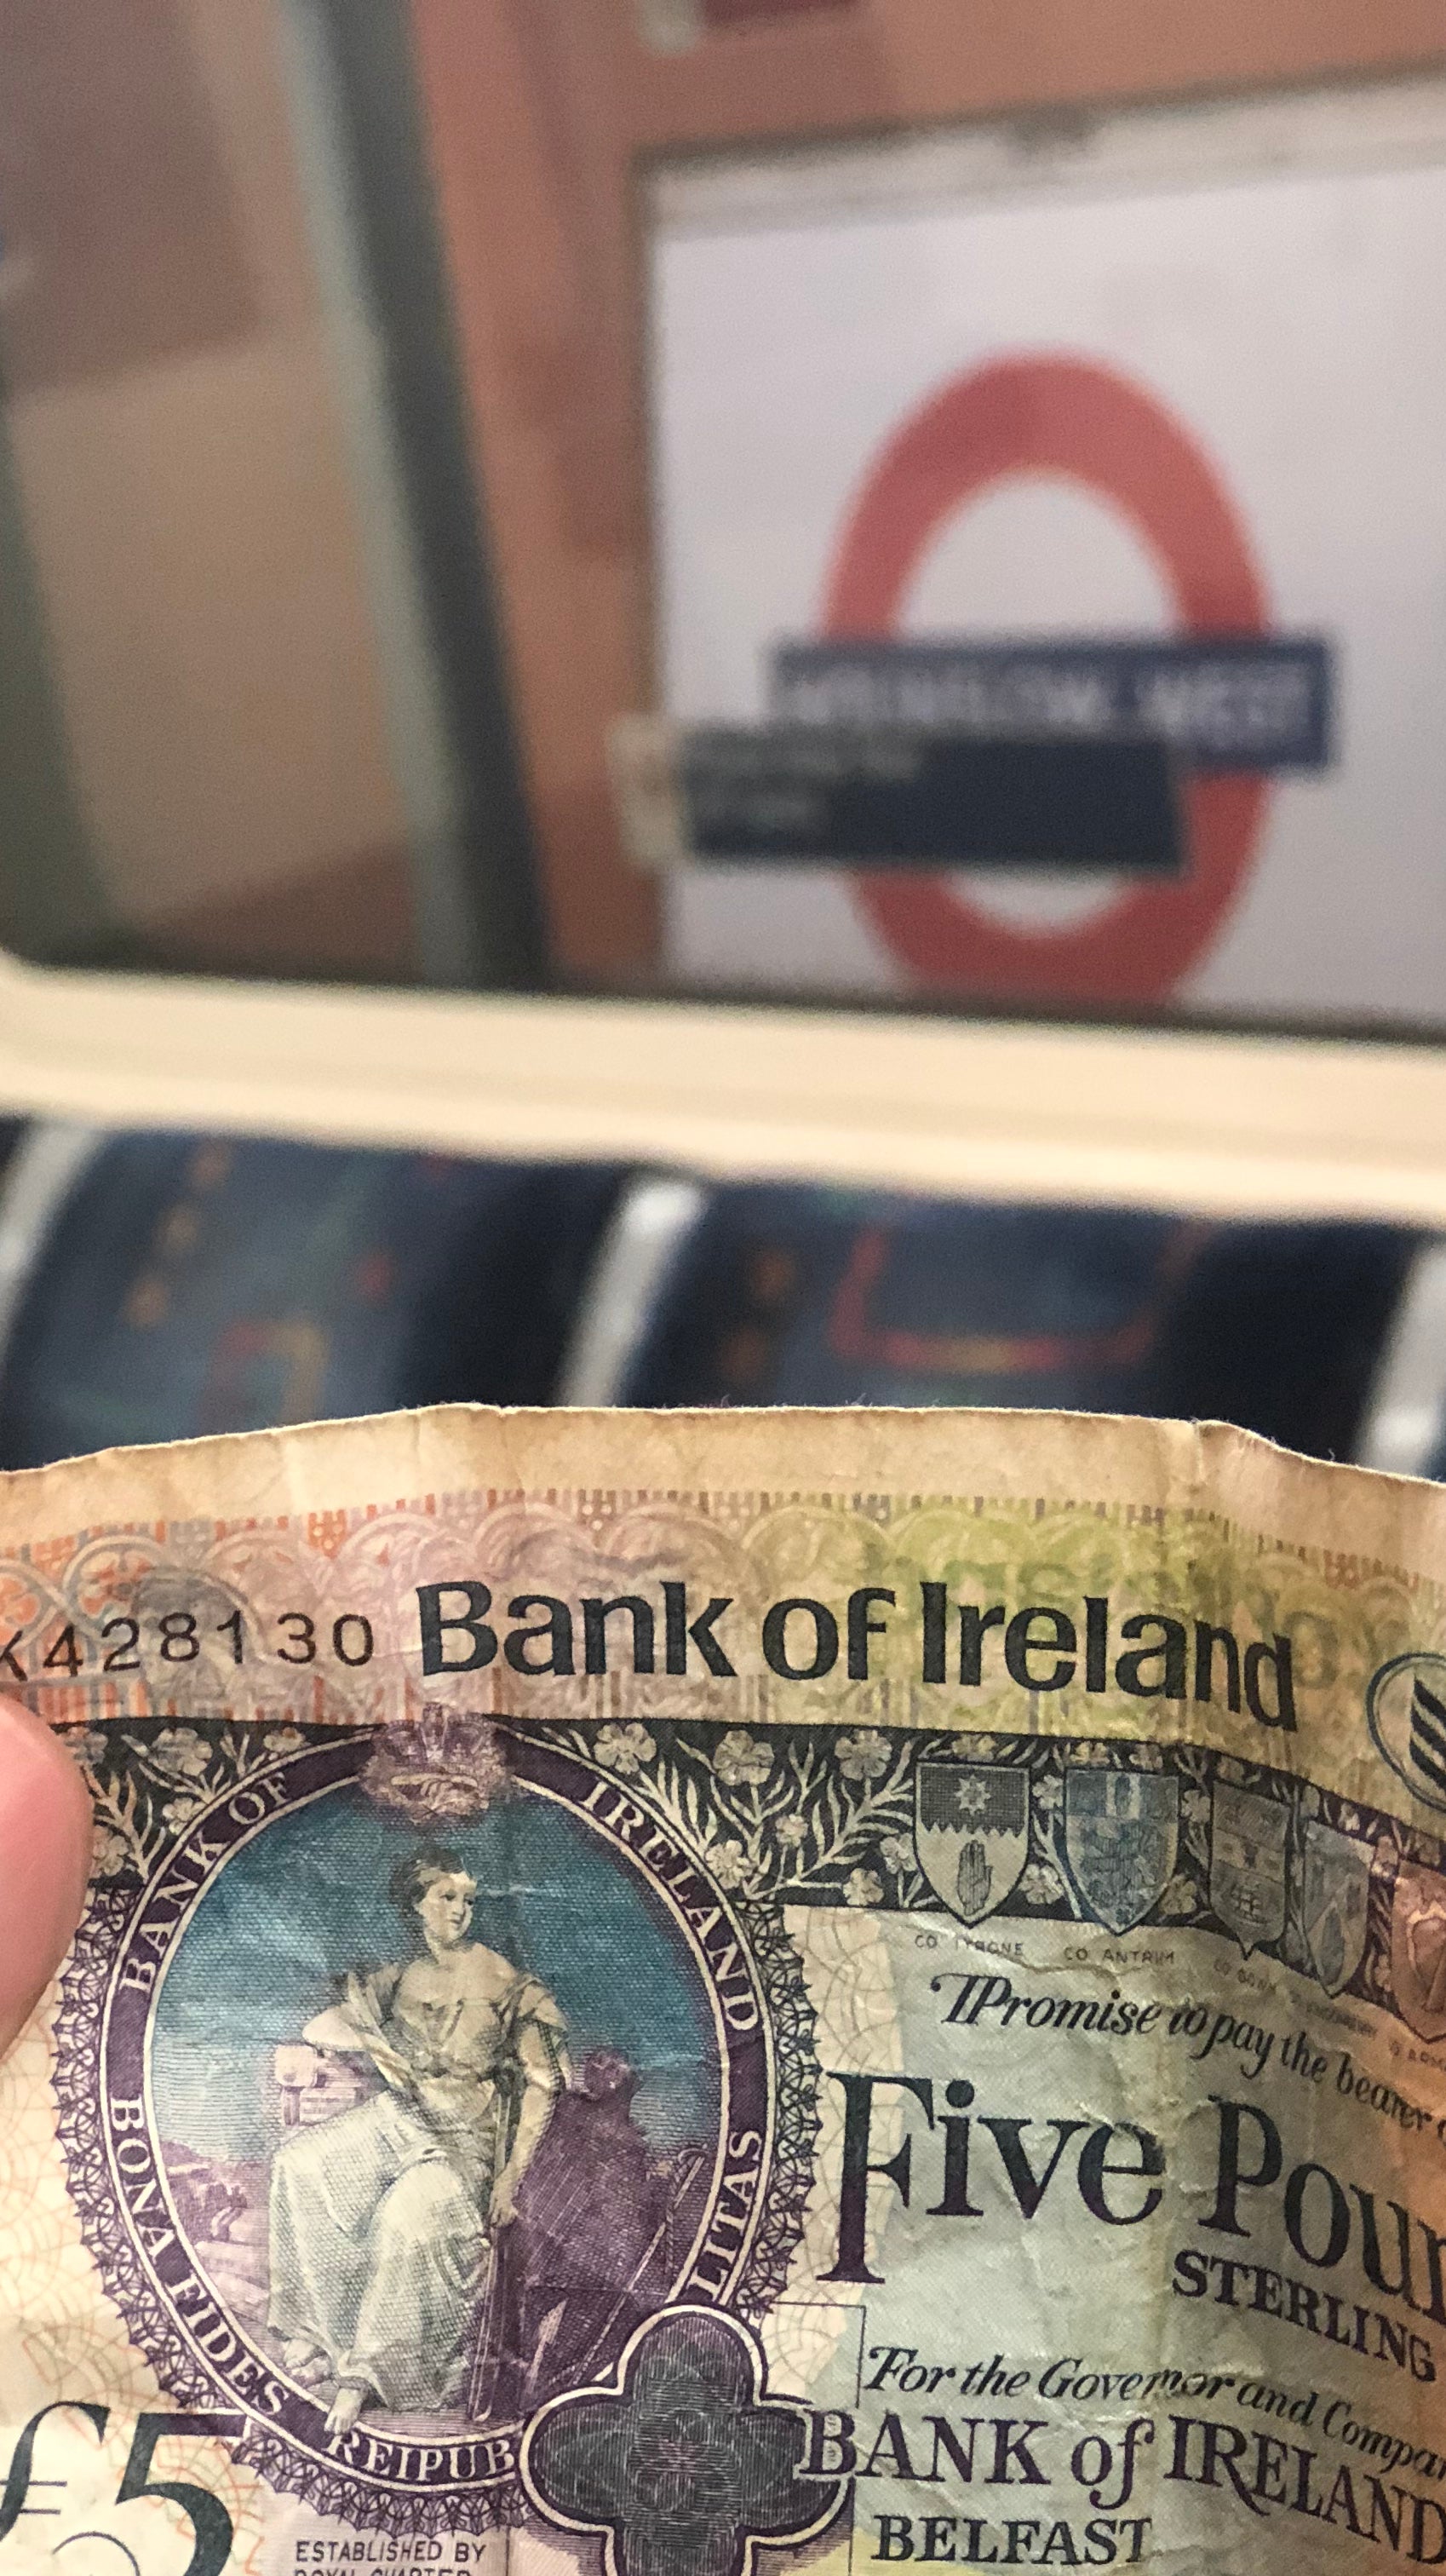 Small Northern Ireland Retailer Refuses to Accept Bank of England Notes as Payment - Belfast Books